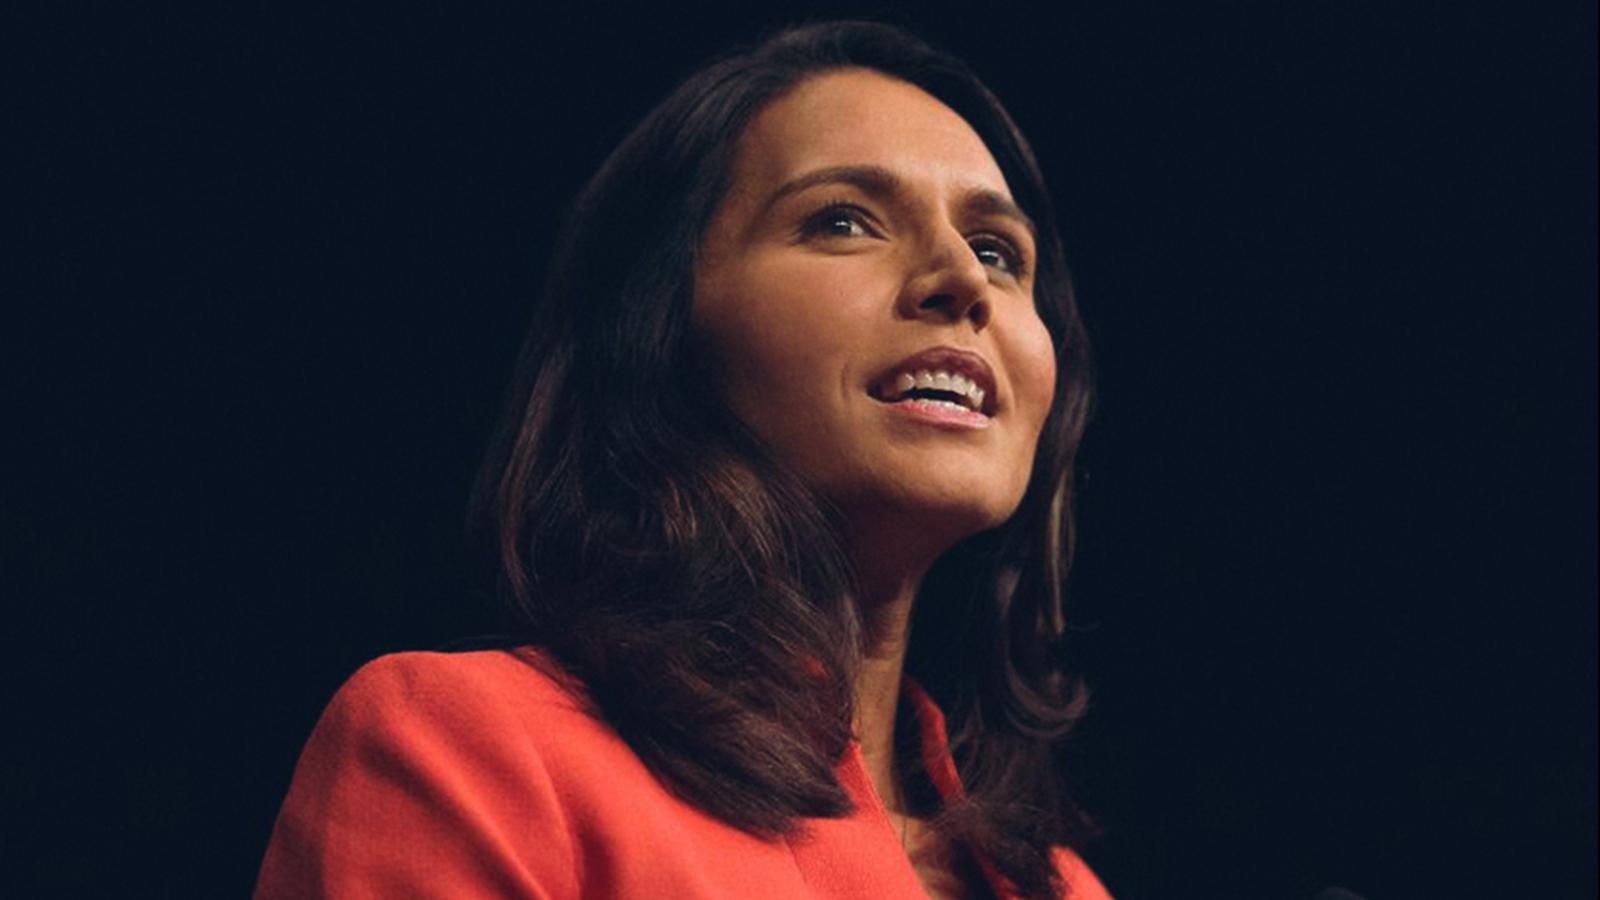 Democrats Have A Chance With Tulsi Gabbard